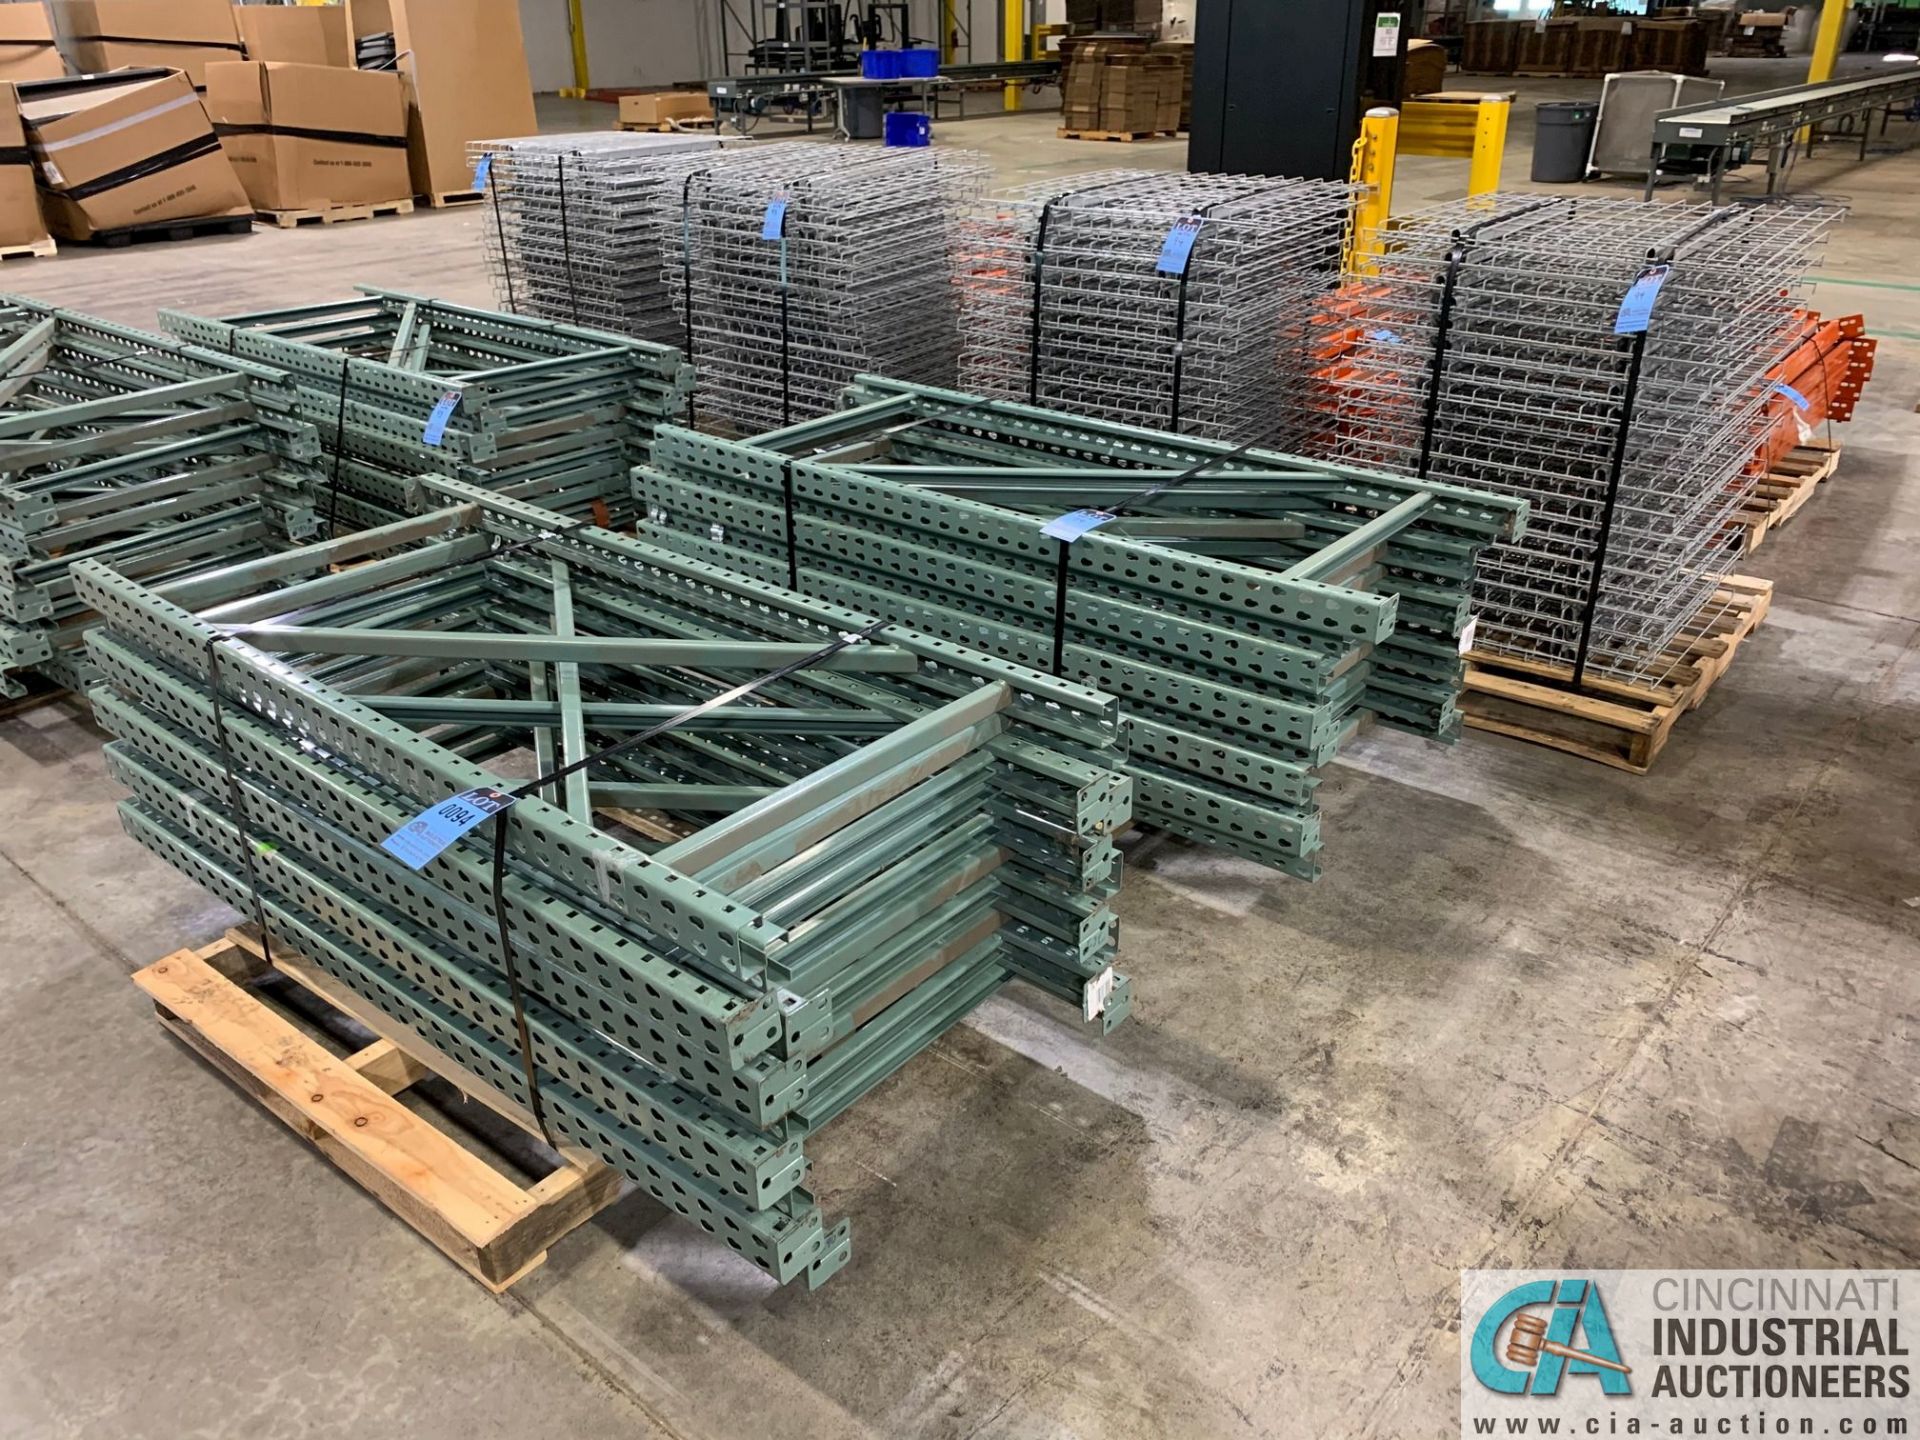 FREE-STANDING SECTIONS 30" X 72" X 72" HIGH ADJUSTABLE BEAM WIRE DECK PALLET RACK CONSISTING OF;